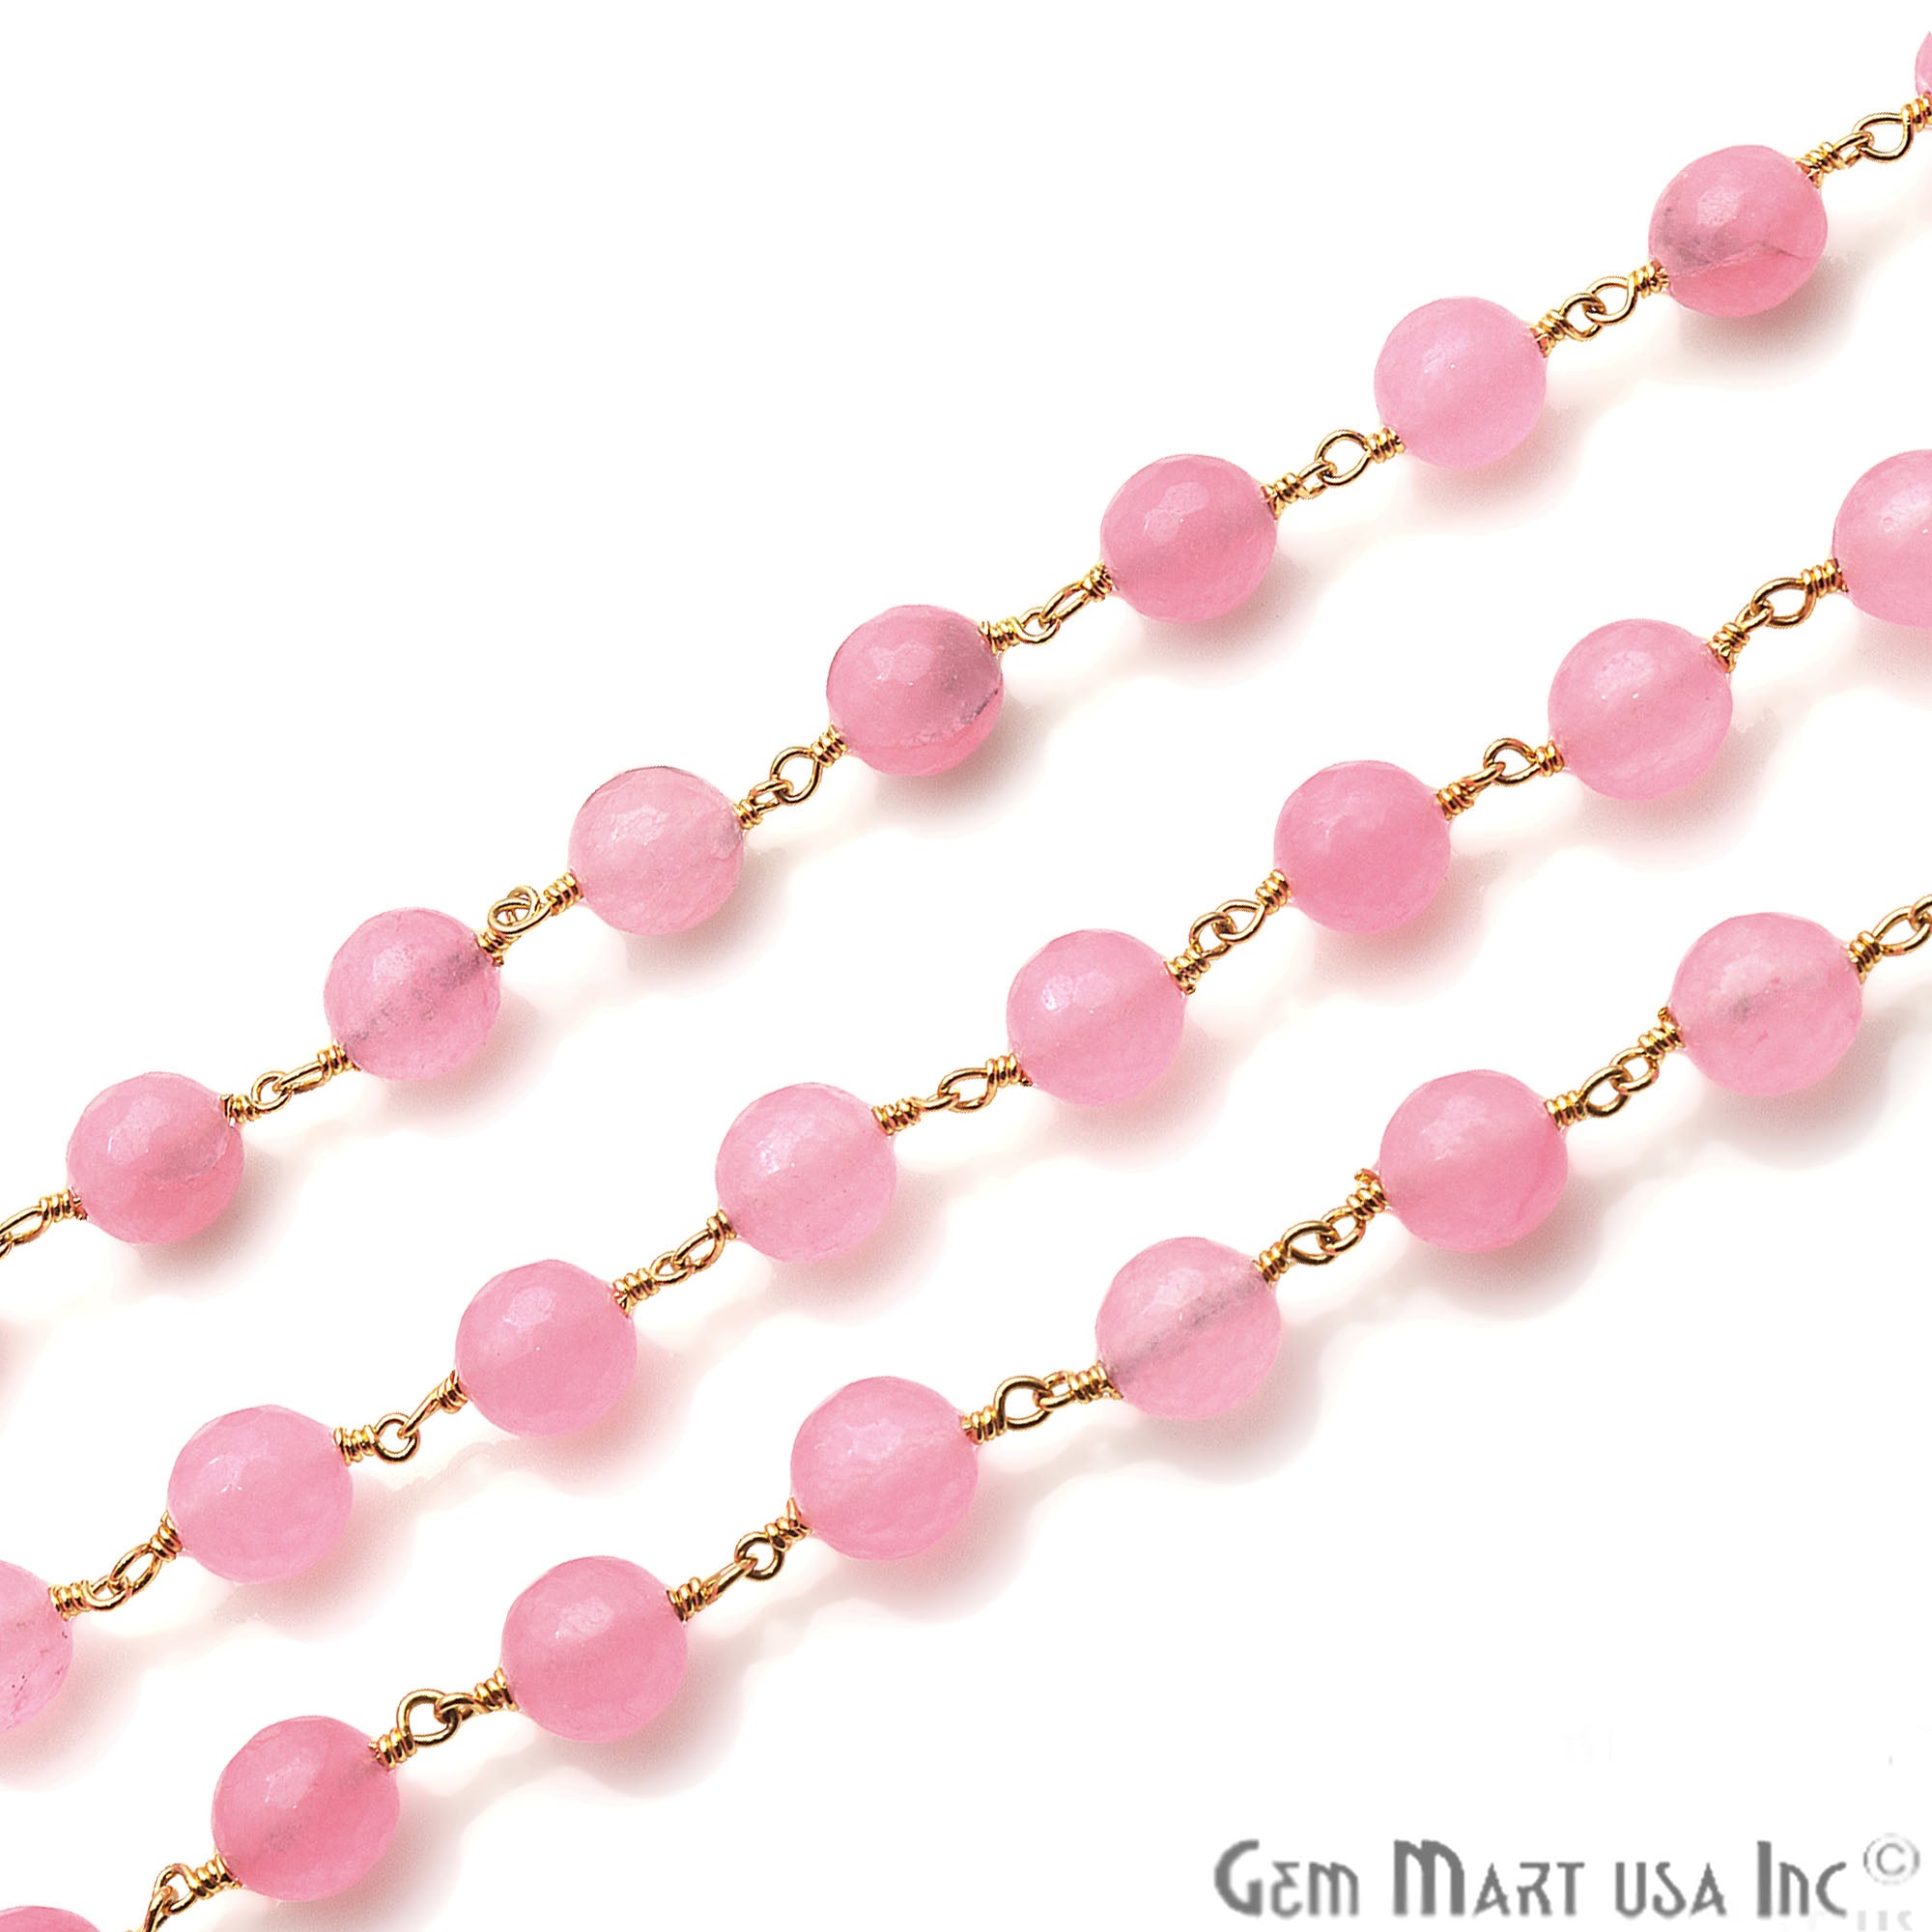 Hot Pink Jade 8mm Beads Gold Plated Wire Wrapped Rosary Chain - GemMartUSA (763726037039)